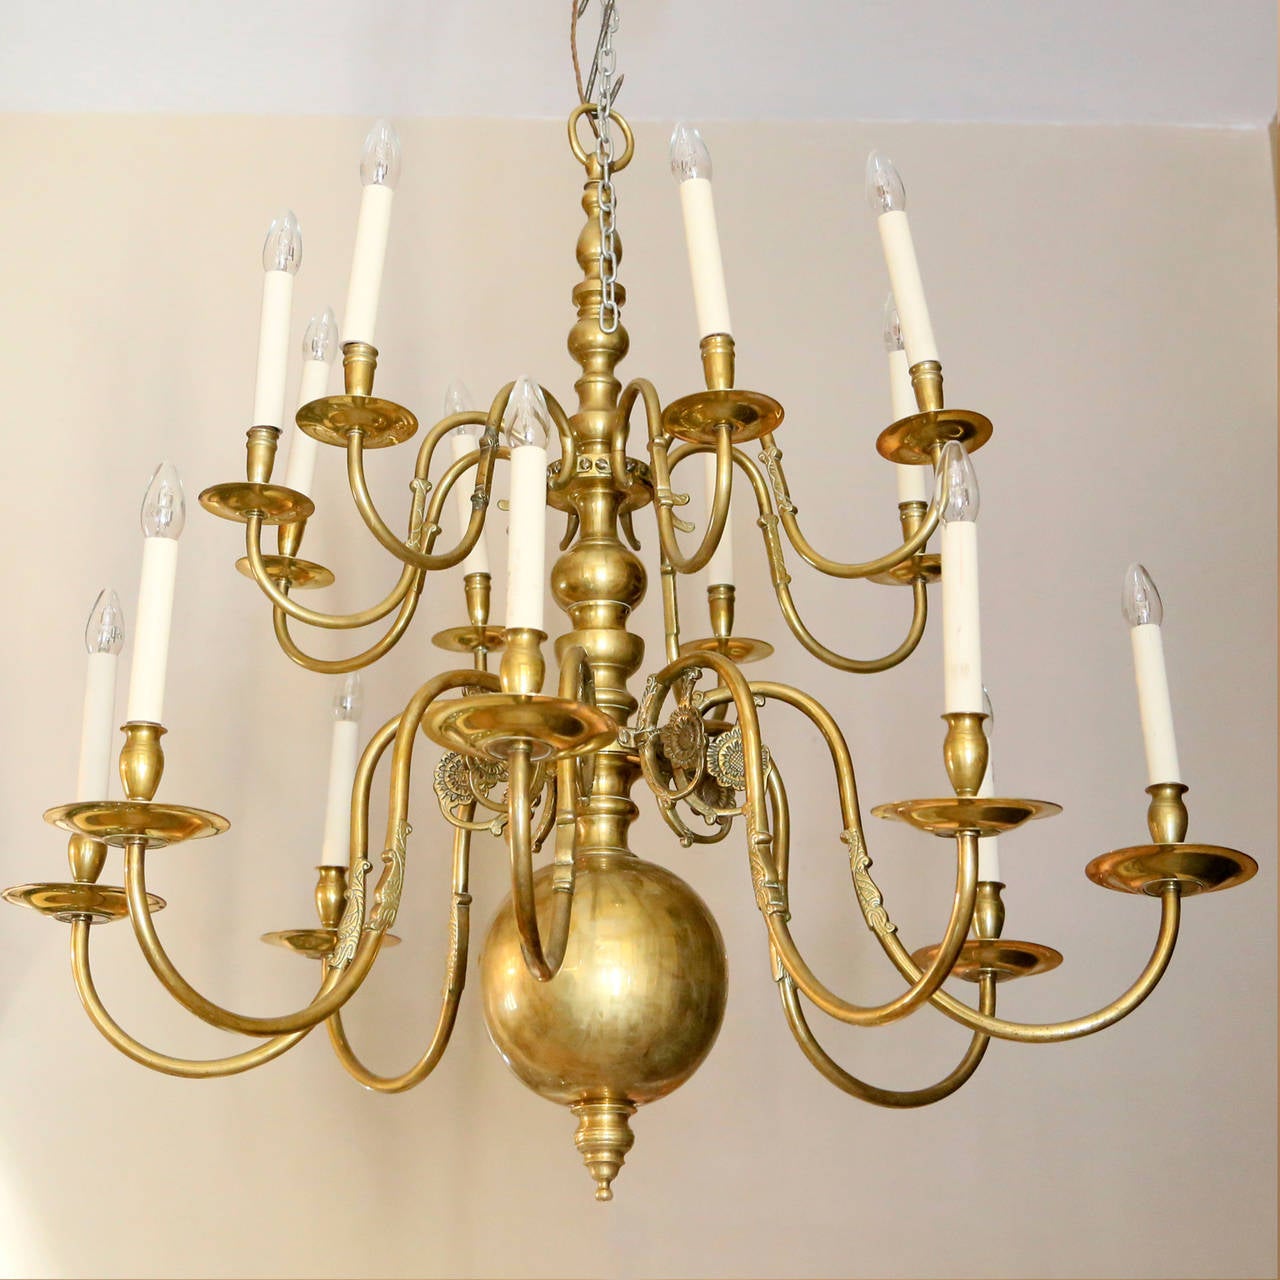 A sixteen light brass Flemish style chandelier, the knopped stem issuing two tiers of scrolled branches.

Available to view at Brunswick House, London.

Height 105cm, width 102cm.